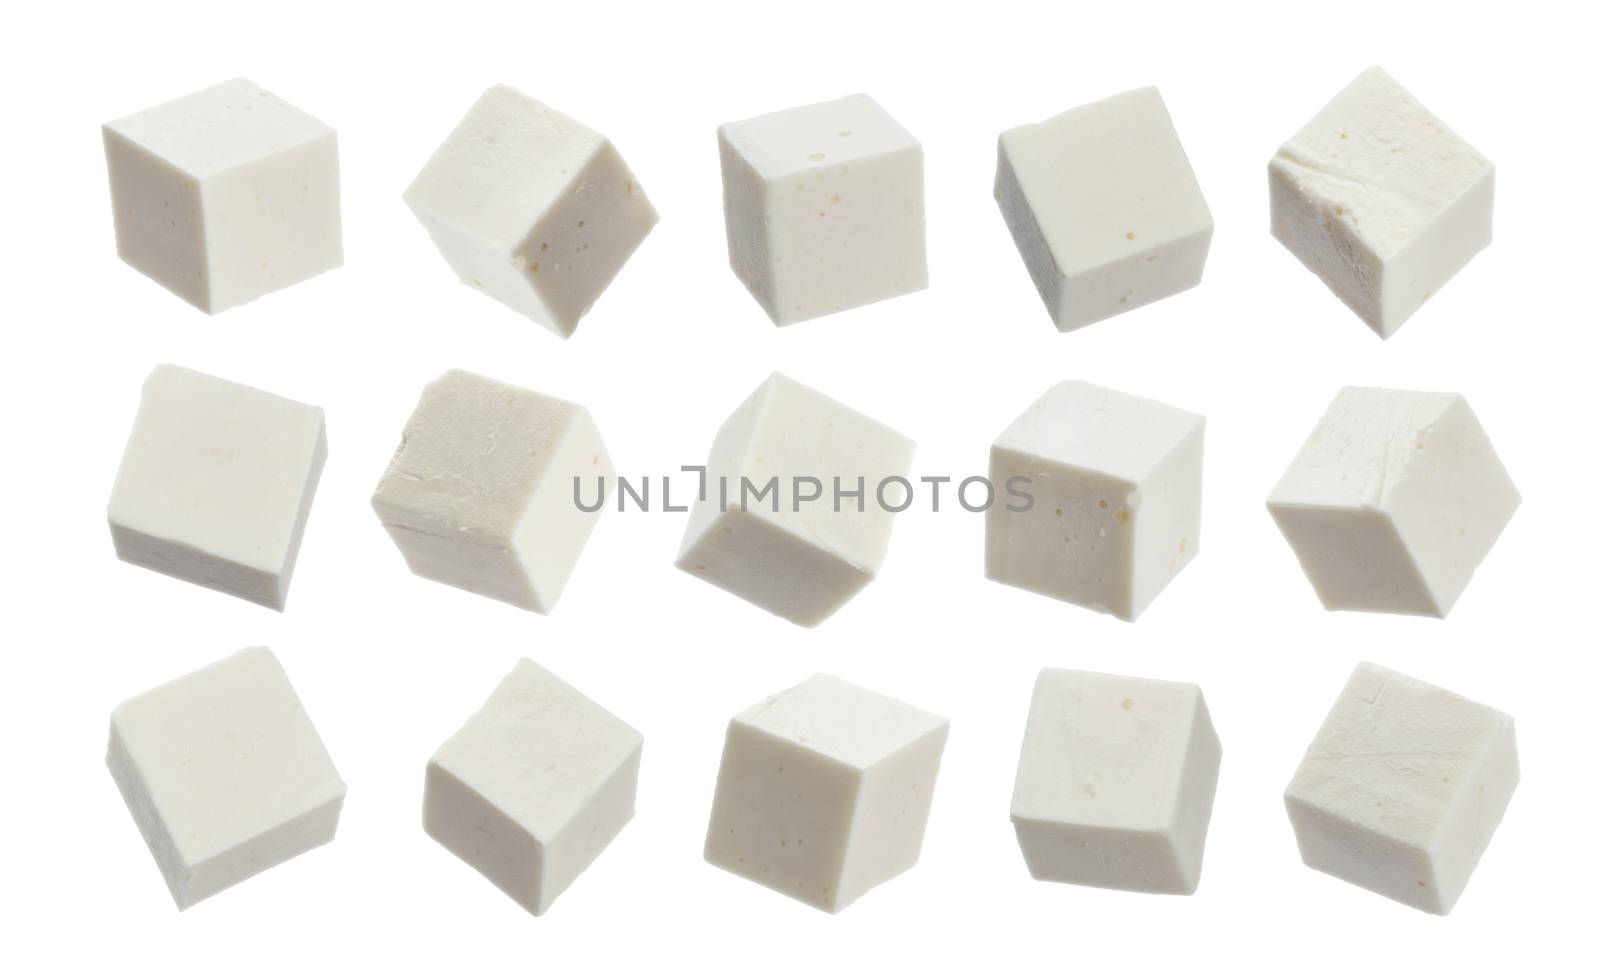 Greek feta cubes. Diced soft cheese isolated on white background by xamtiw